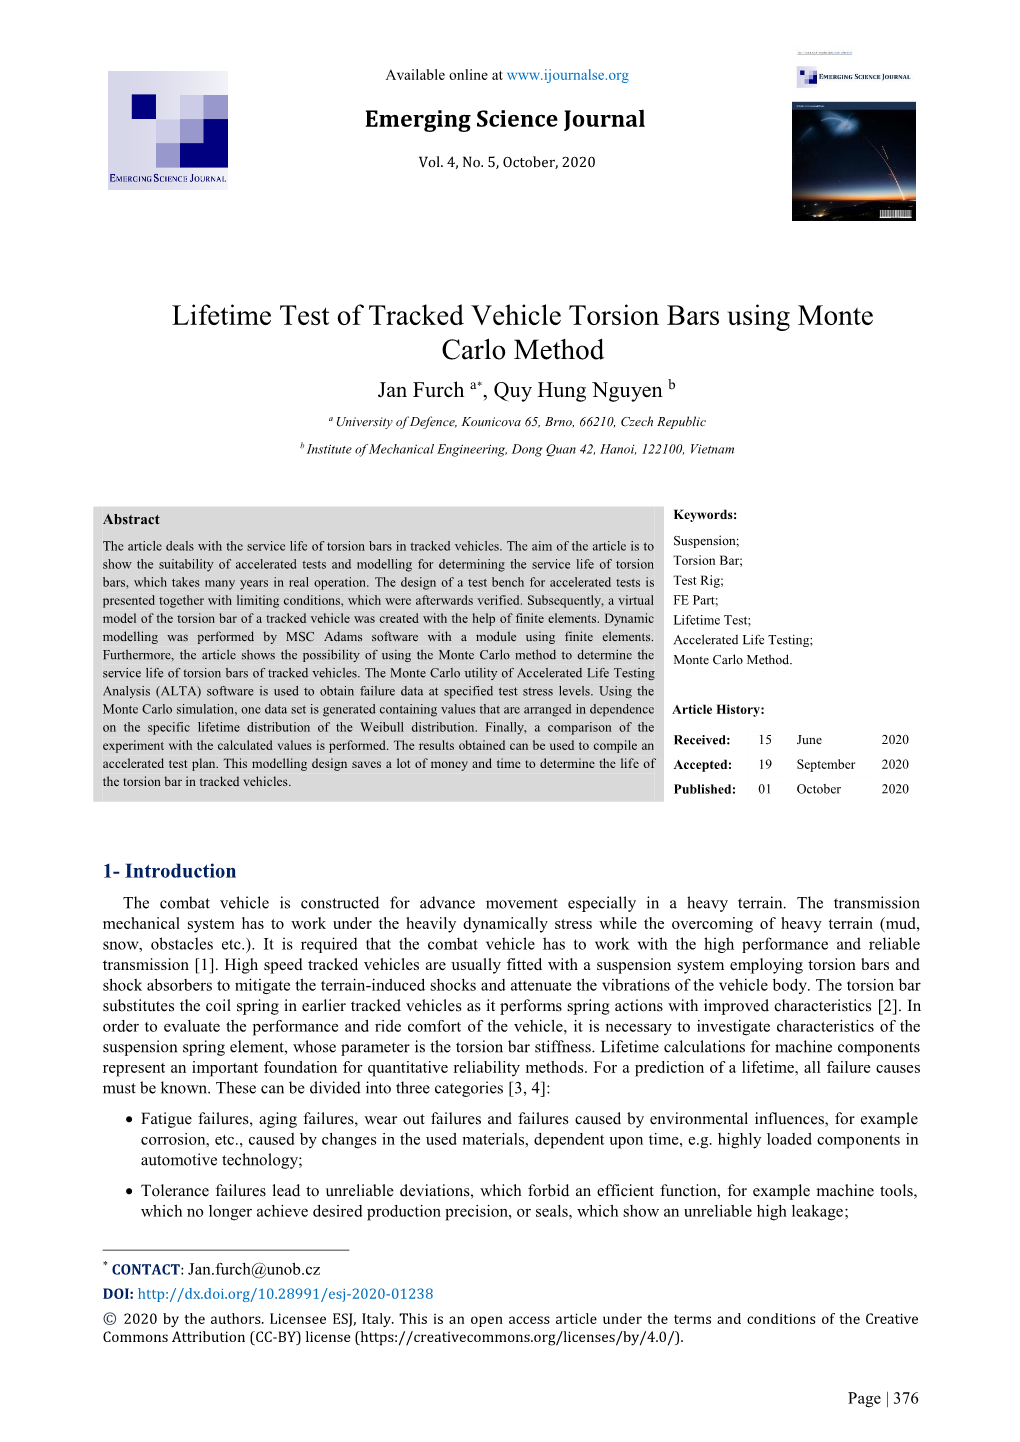 Lifetime Test of Tracked Vehicle Torsion Bars Using Monte Carlo